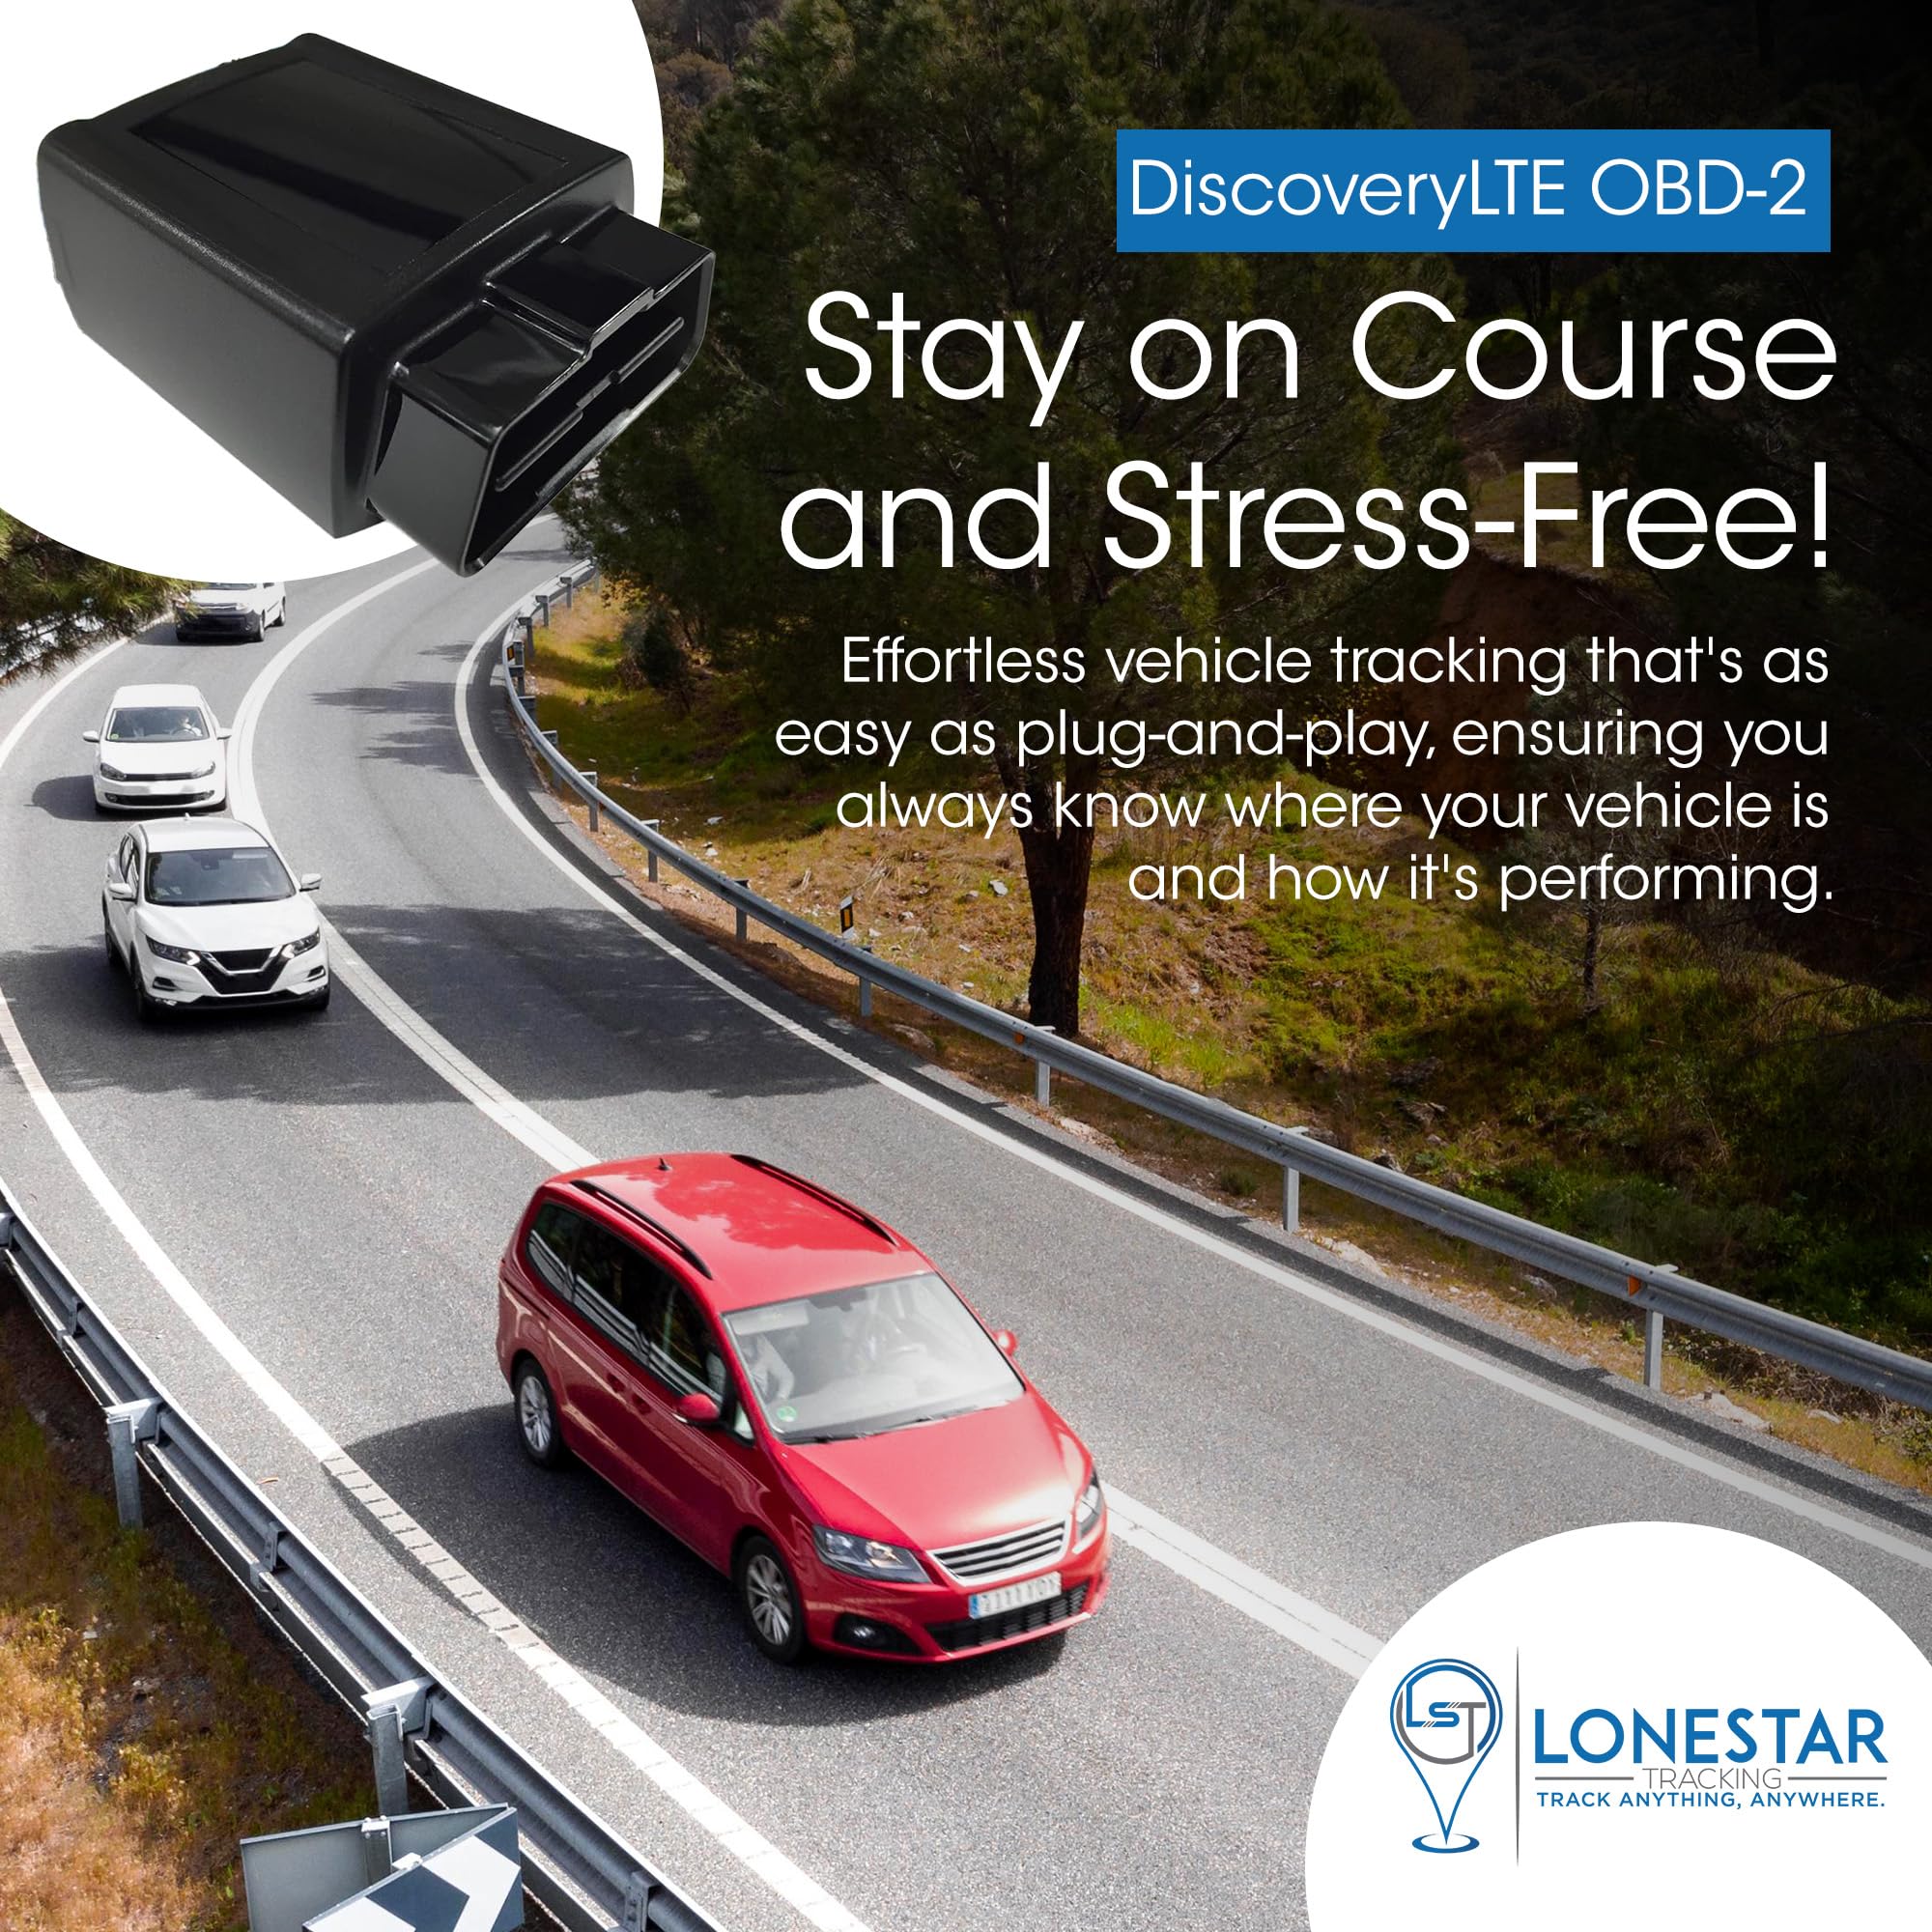 LoneStar Tracking DiscoveryLTE OBD-2 Tracking Device for Cars with ODB2 Y Cable Bundle - Plug and Play ODB GPS Tracker, Car GPS Tracker, Plug in Car Tracker (Subscription Required)